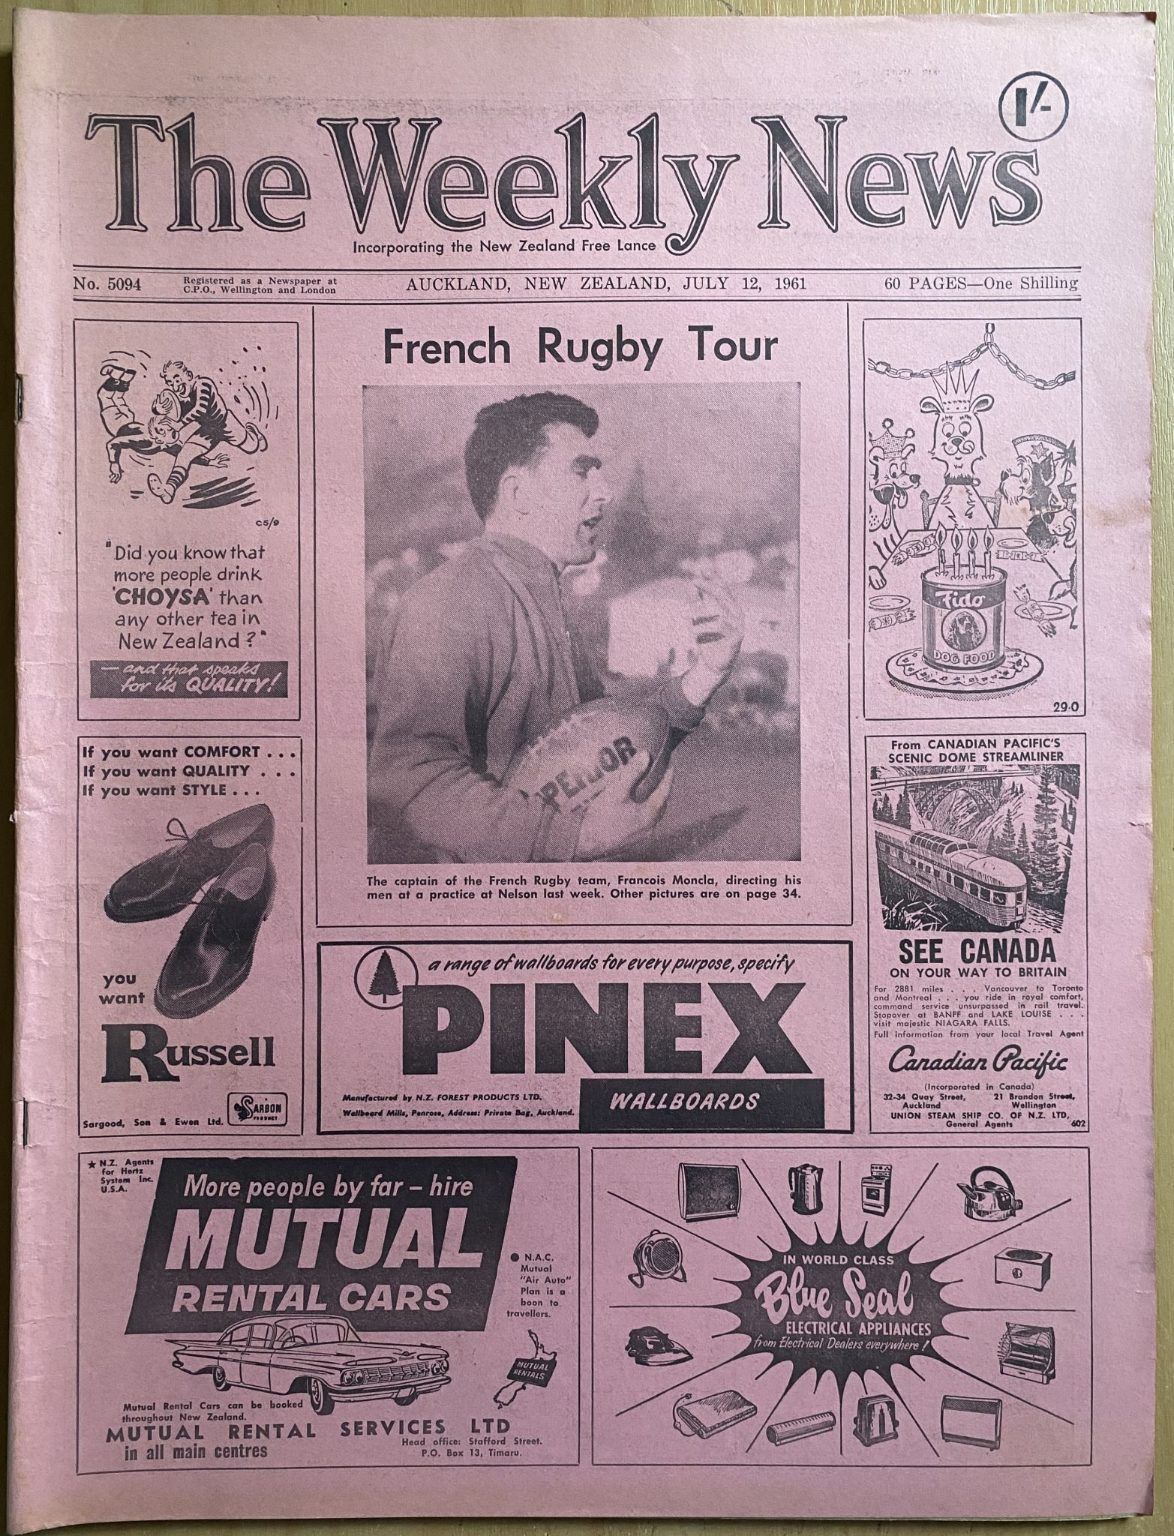 OLD NEWSPAPER: The Weekly News, No. 5094, 12 July 1961